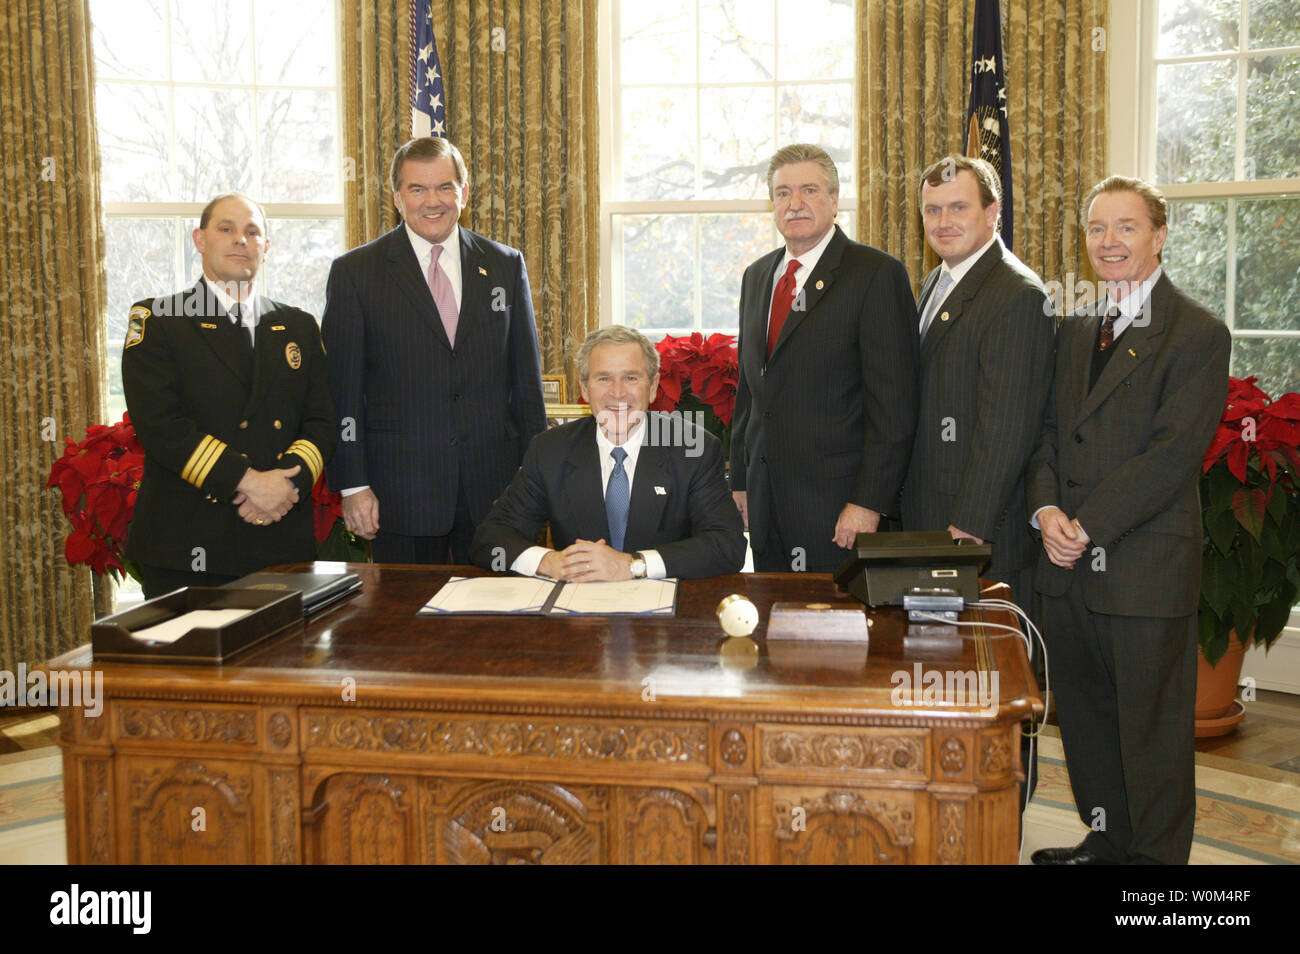 President George W. Bush poses Tuesday December 16, 2003 in the Oval Office with from left to right: Chuck Canterbury, National President, Fraternal Order of Police; Secretary of Homeland Security Tom Ridge; Harold Schaitberger, General President of the International Association of Fire Fighters; Kevin O’Connor, Assistant to the General President of the International Association of Fire Fighters for Government and Public Affairs; and James Pasco, Executive Director of the National Fraternal Order of Police. The photo opportunity was in recognition of  the Hometown Heroes Survivors Benefits Act Stock Photo